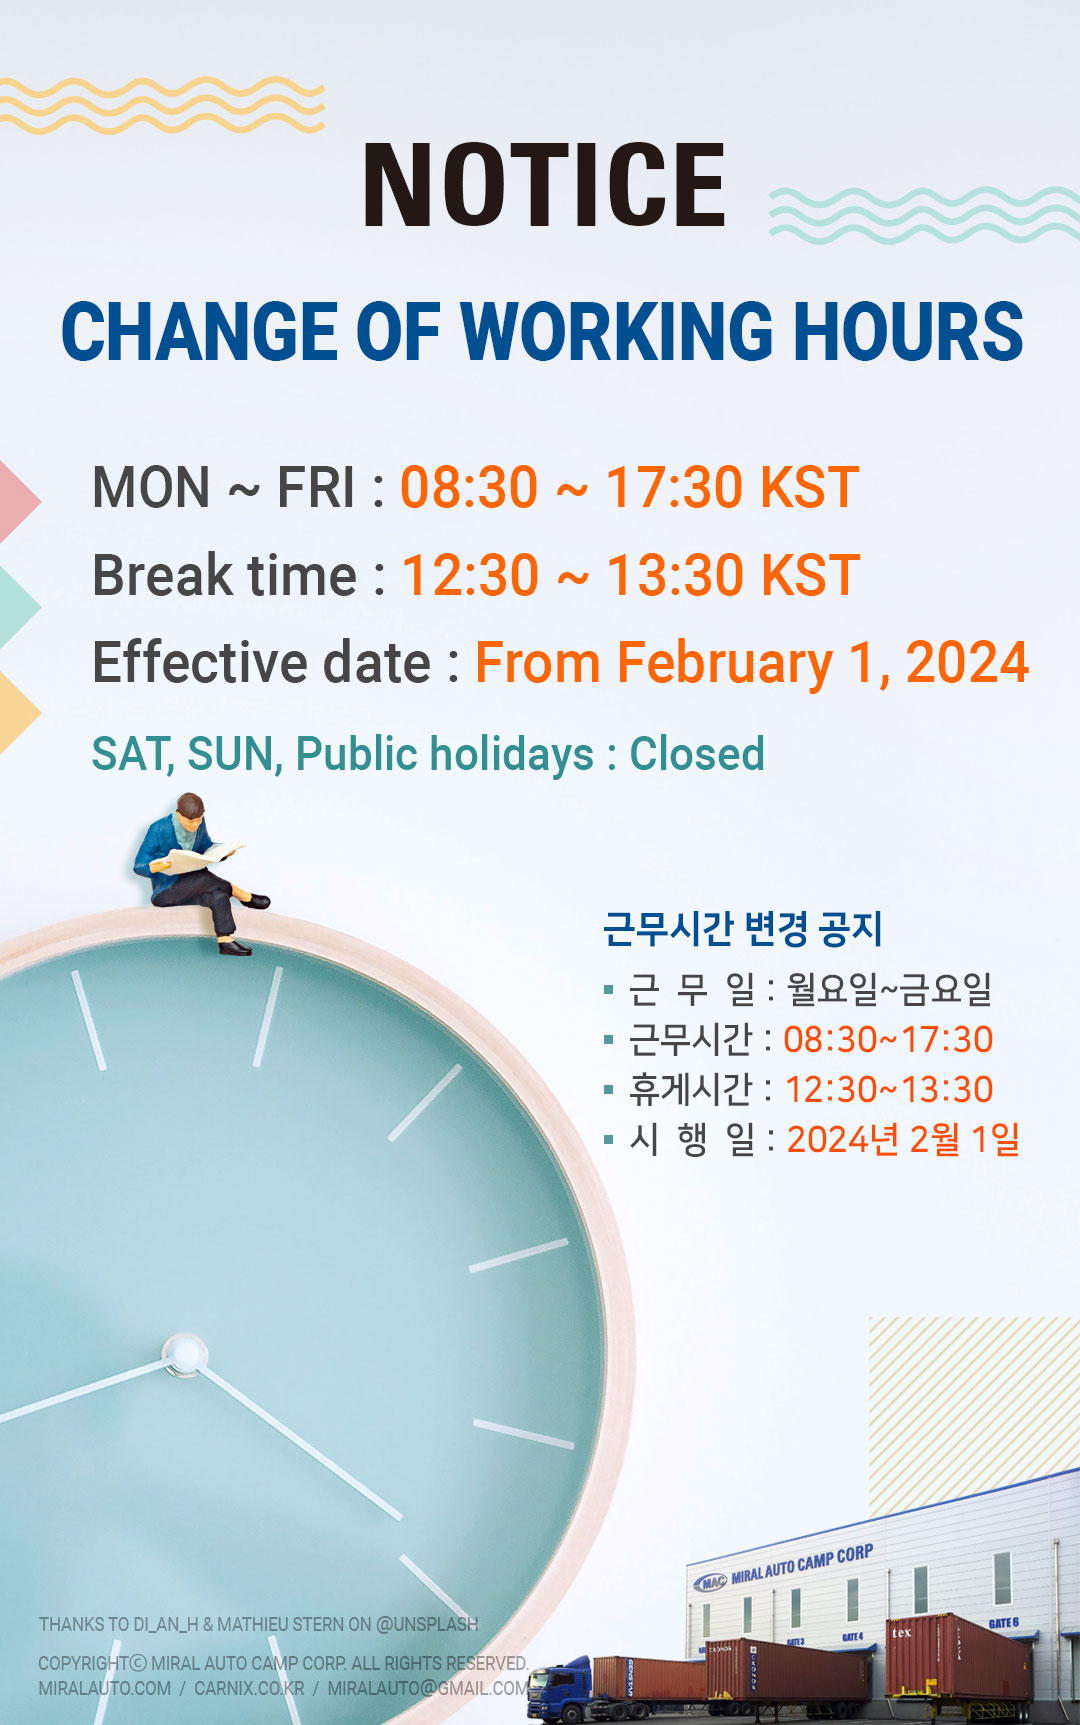 MAC - Notice - Change of working hours - Working hours : 08:30~17:30 KST,  Break time : 12:30~13:30 KST,  Effective date :  From February 1, 2024